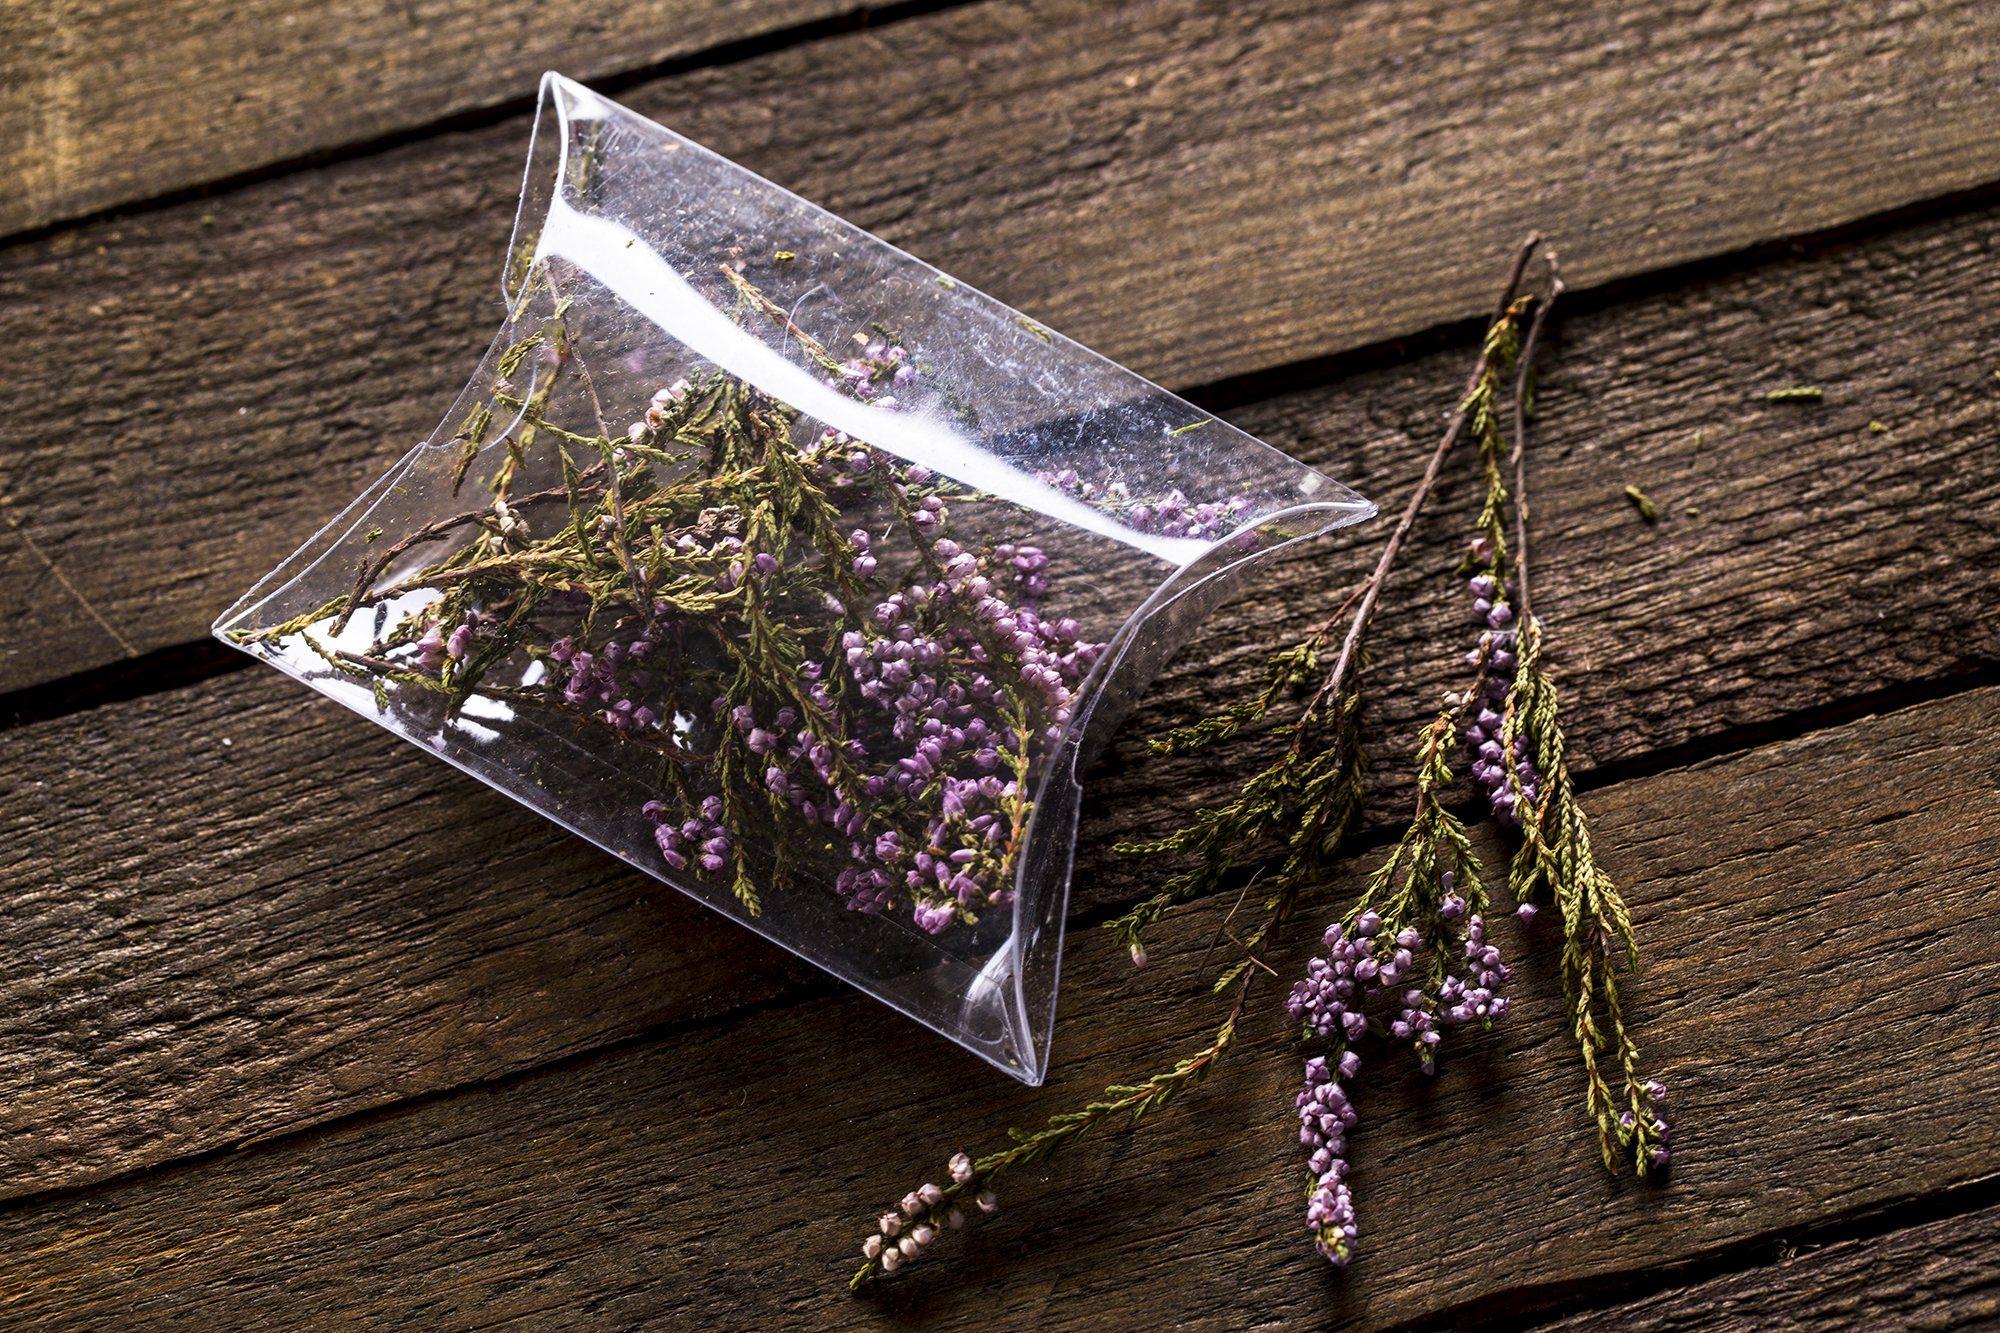 Natural dried heather for resin dried flowers for resin Dried Flower flower  petals Confetti Craft Supply Jewelry Box of Real Flower Bits – 7LeafShop  Wedding Bouquets